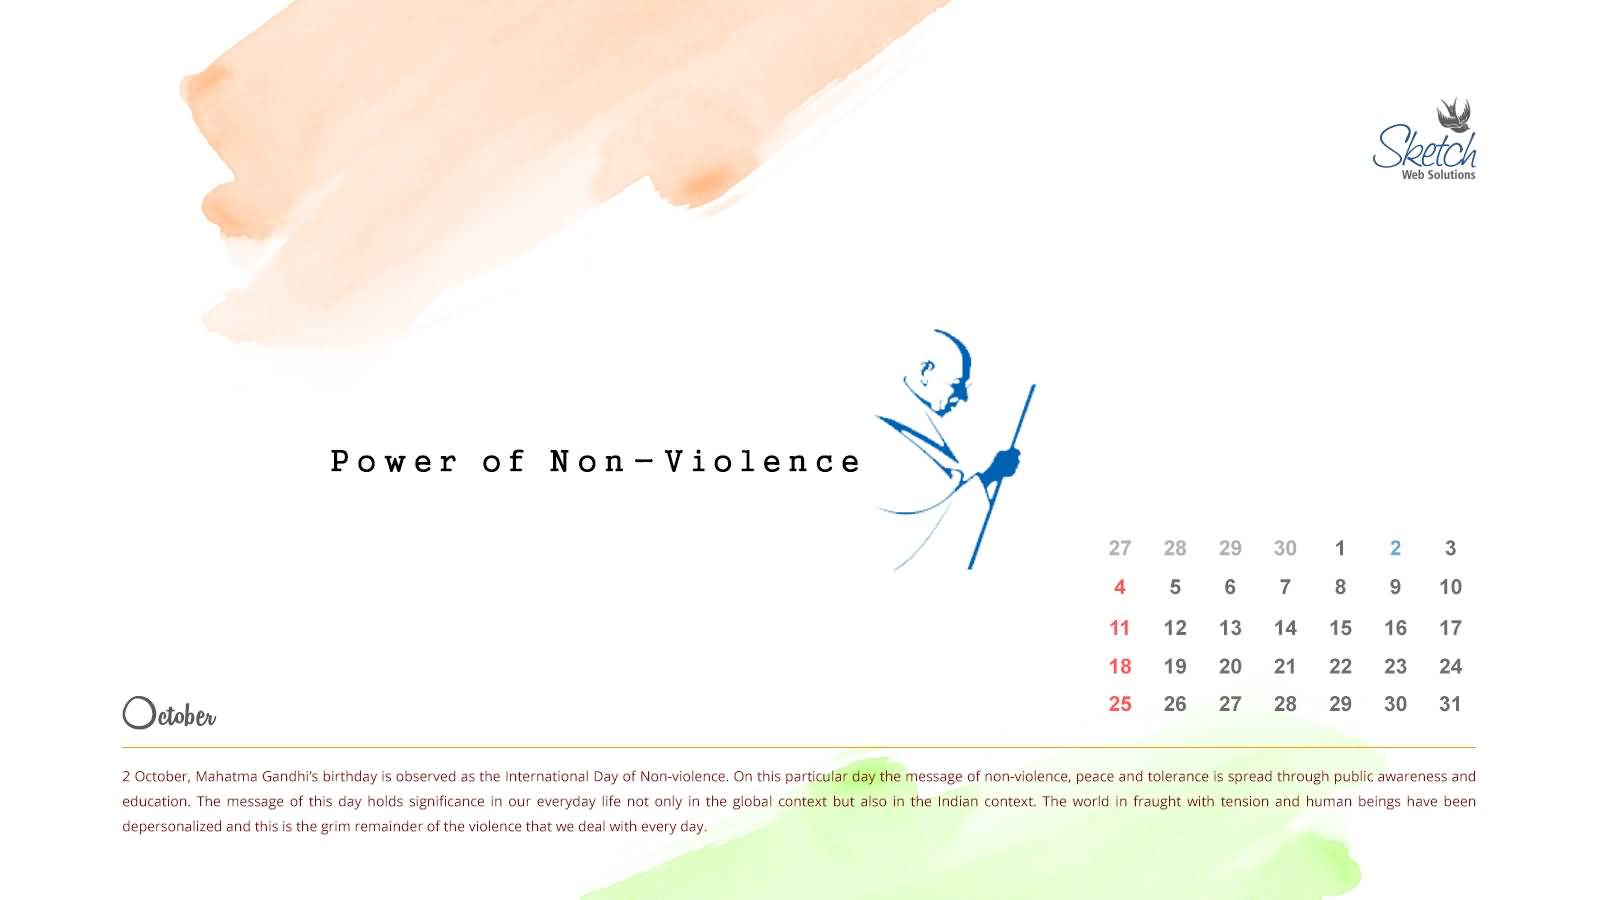 Power Of Non-Violence Happy International Day of Non-Violence 2nd October